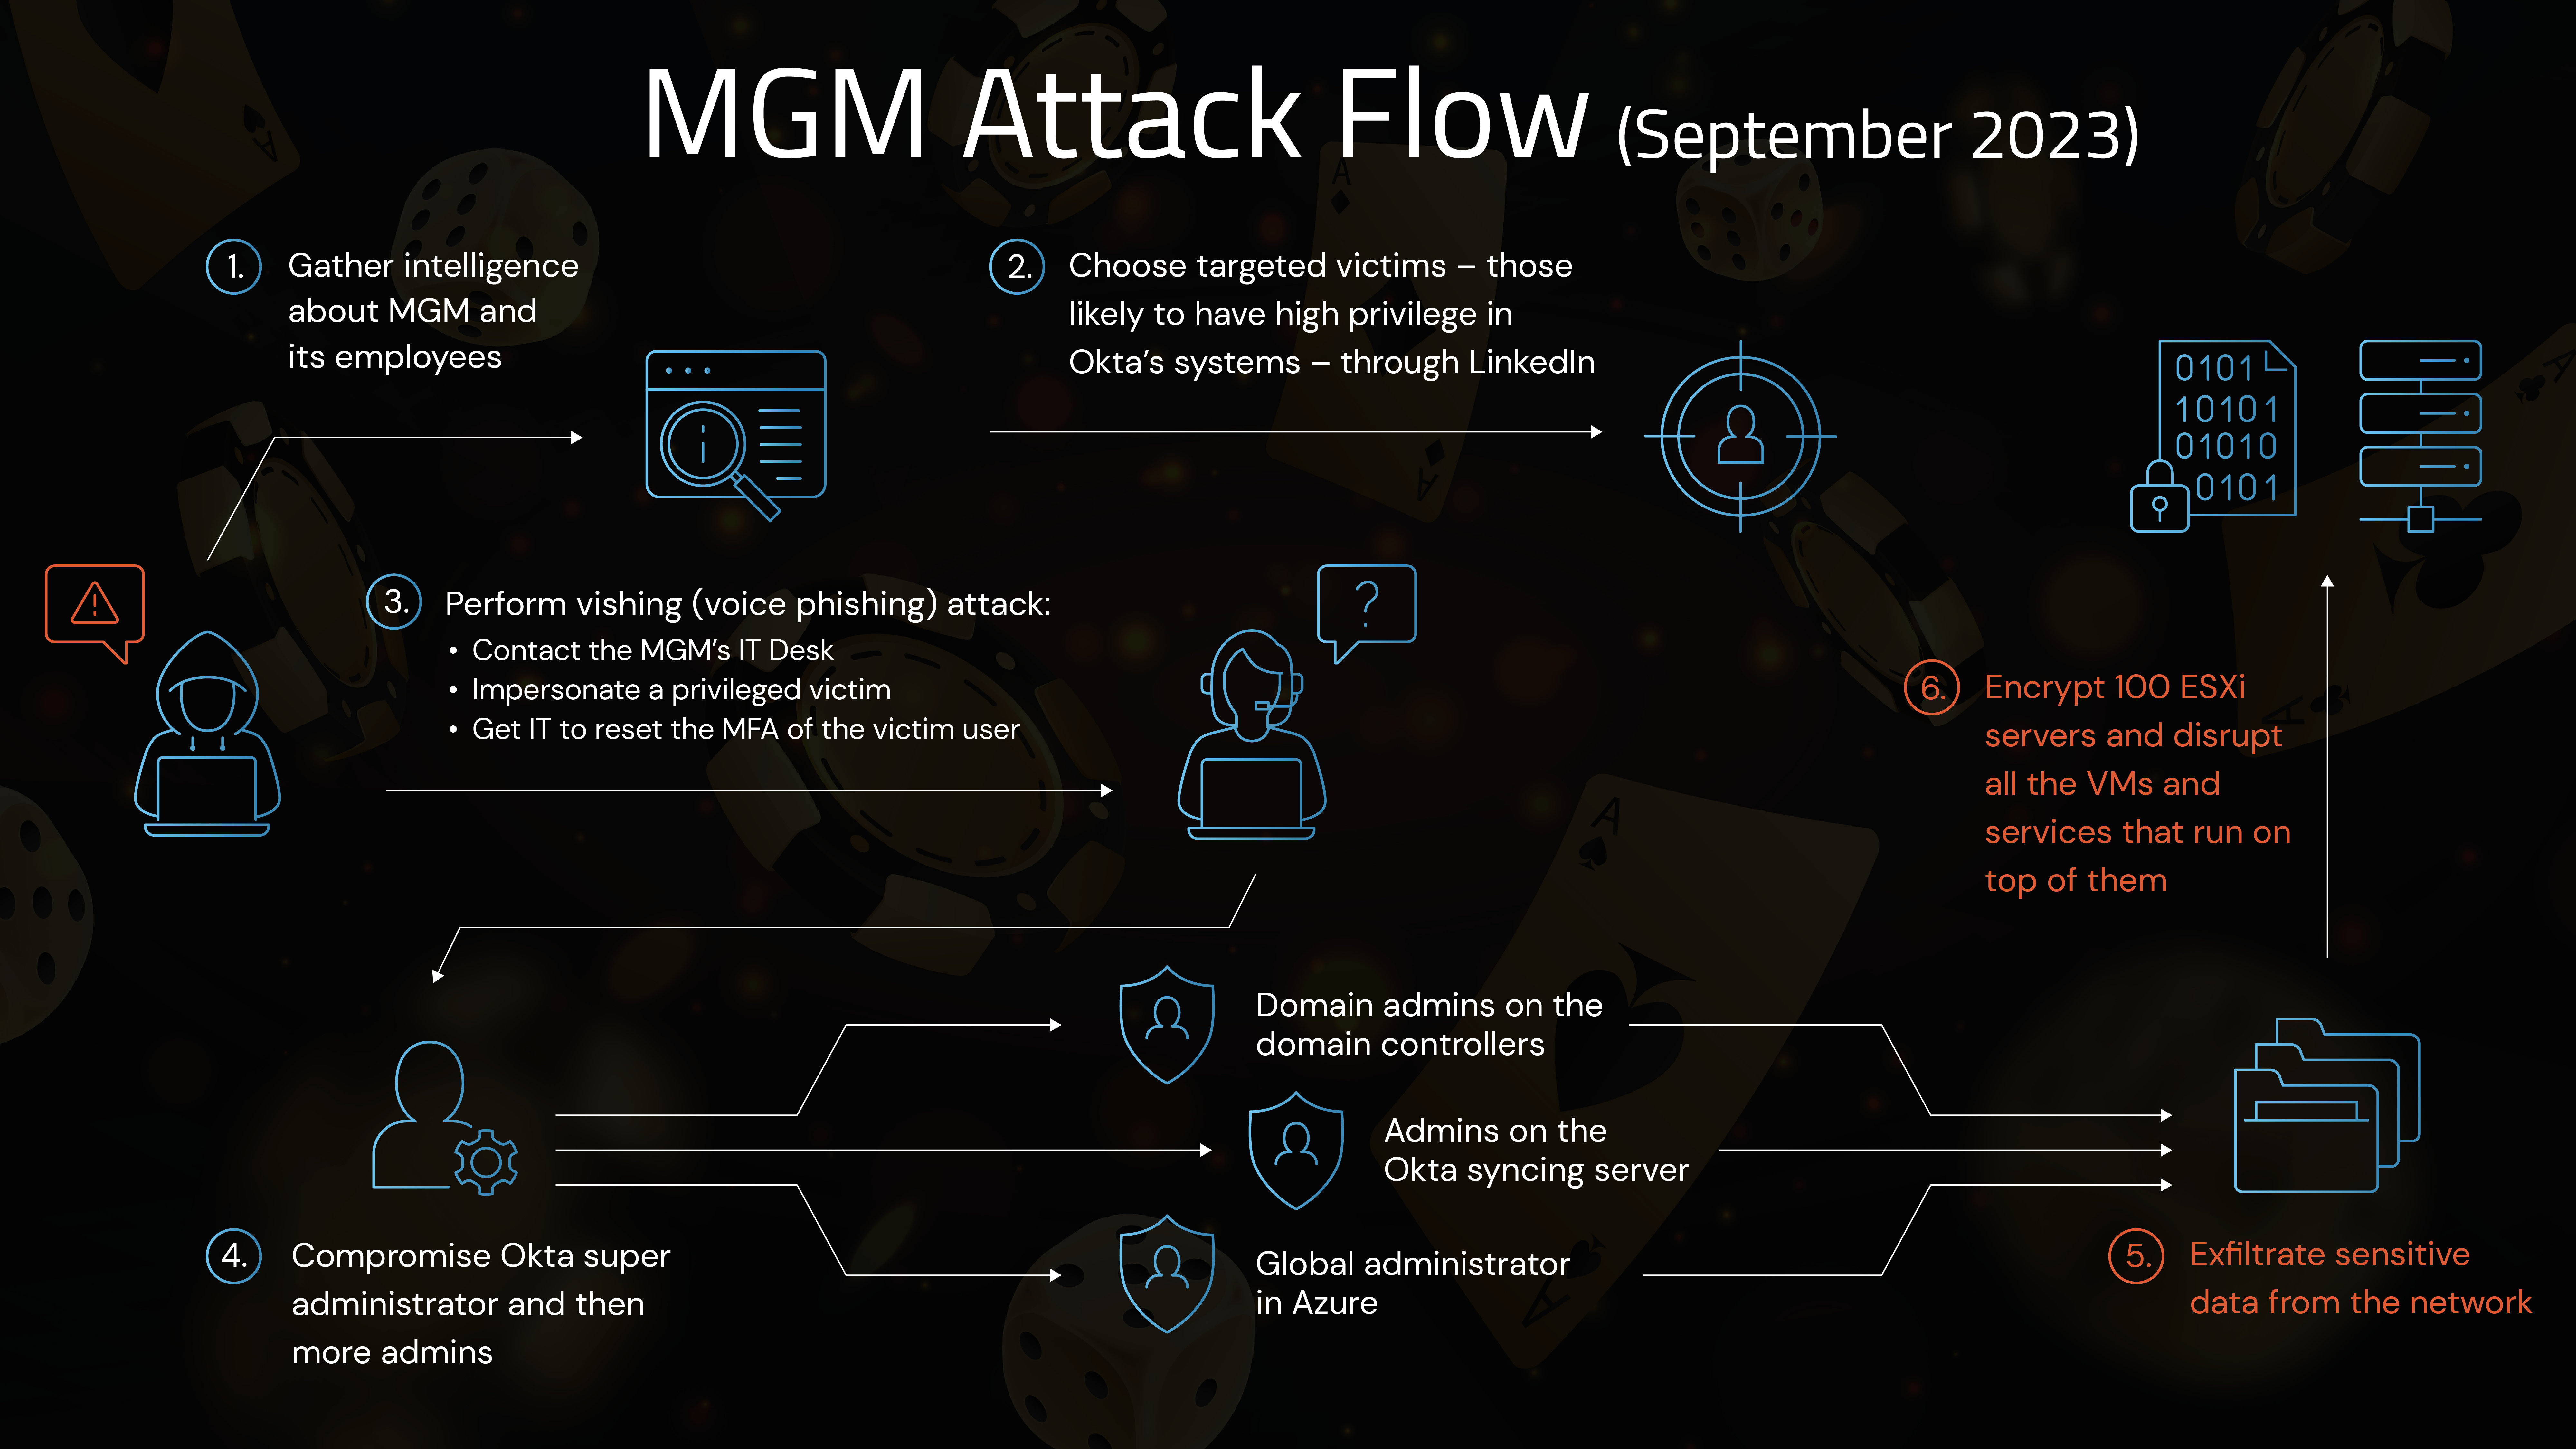 Graphical depiction of the MGM cyberattack flow.